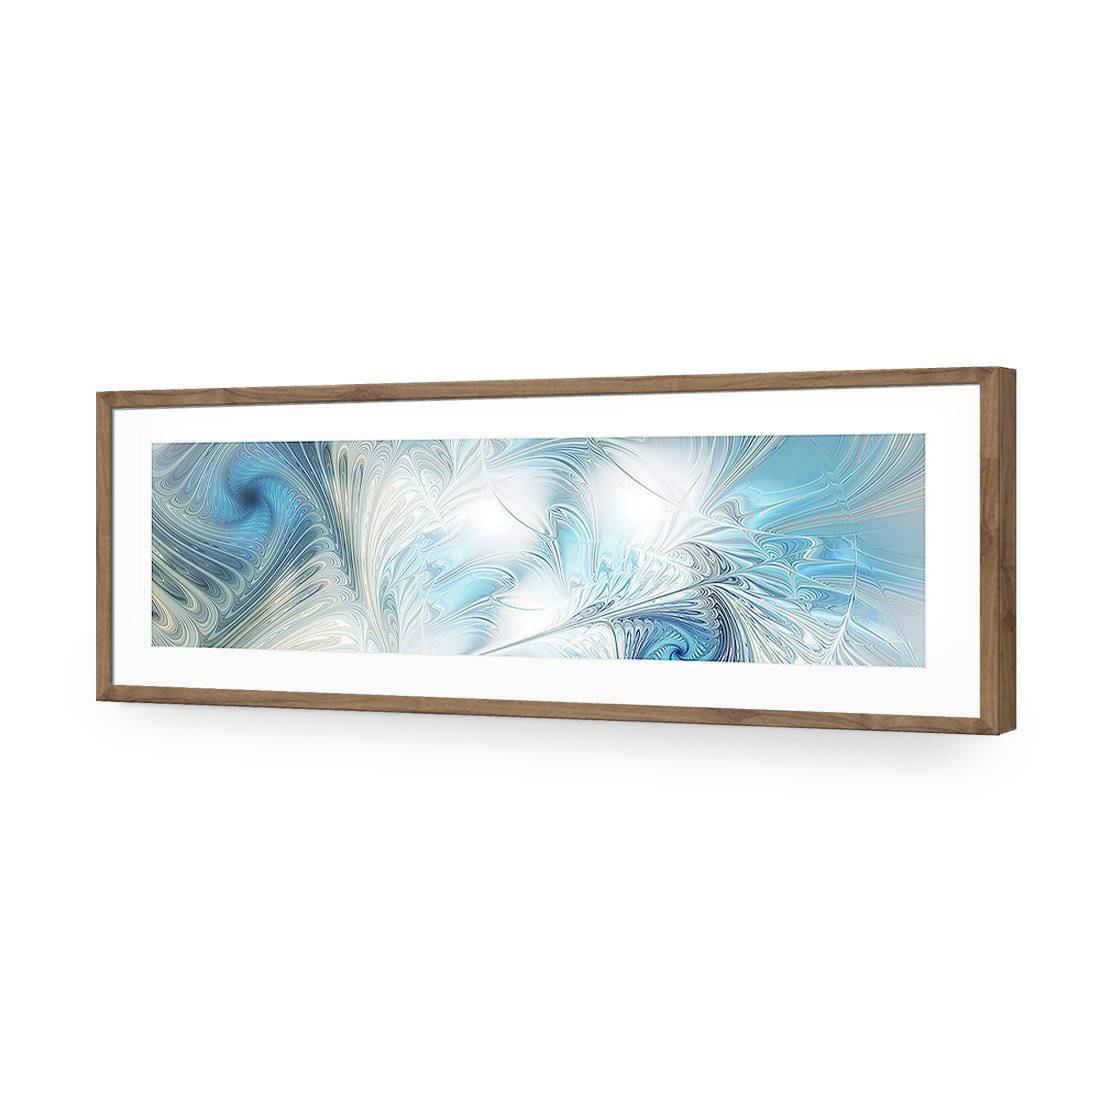 Travesty, Long-Acrylic-Wall Art Design-With Border-Acrylic - Natural Frame-60x20cm-Wall Art Designs